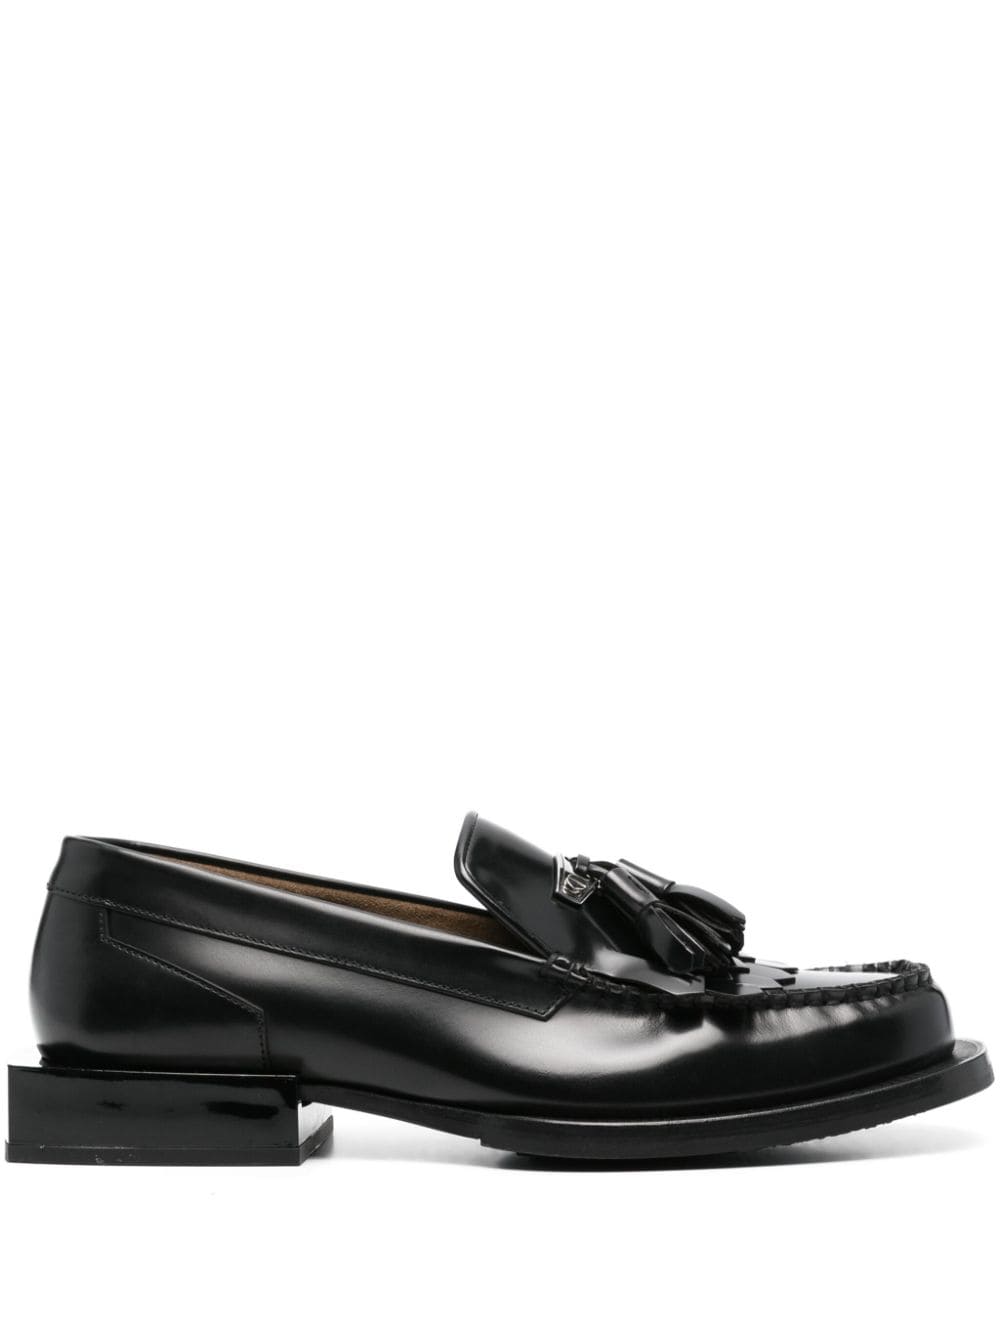 EYTYS Rio tassel-detail leather loafers - Black